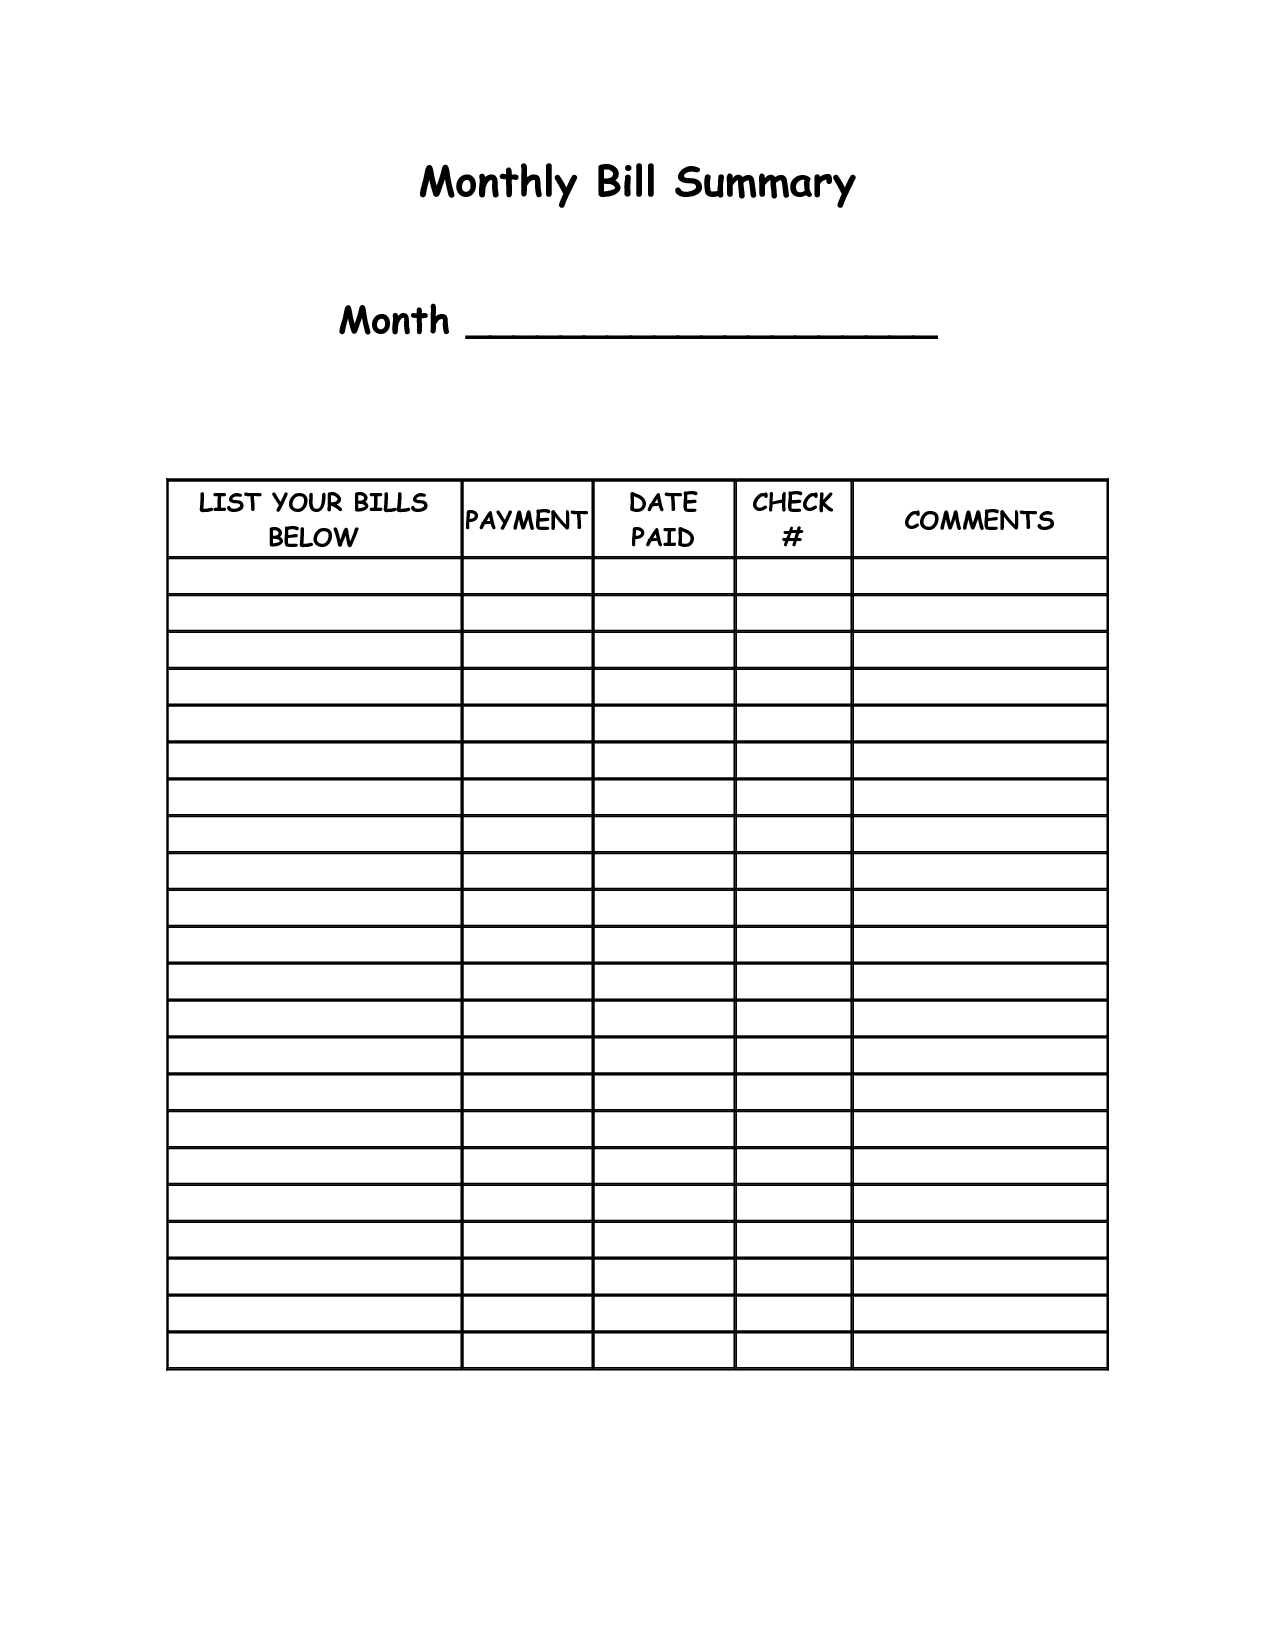 Monthly Bill Summary Doc | Organization | Organizing Monthly-Monthly List Of Bills Due